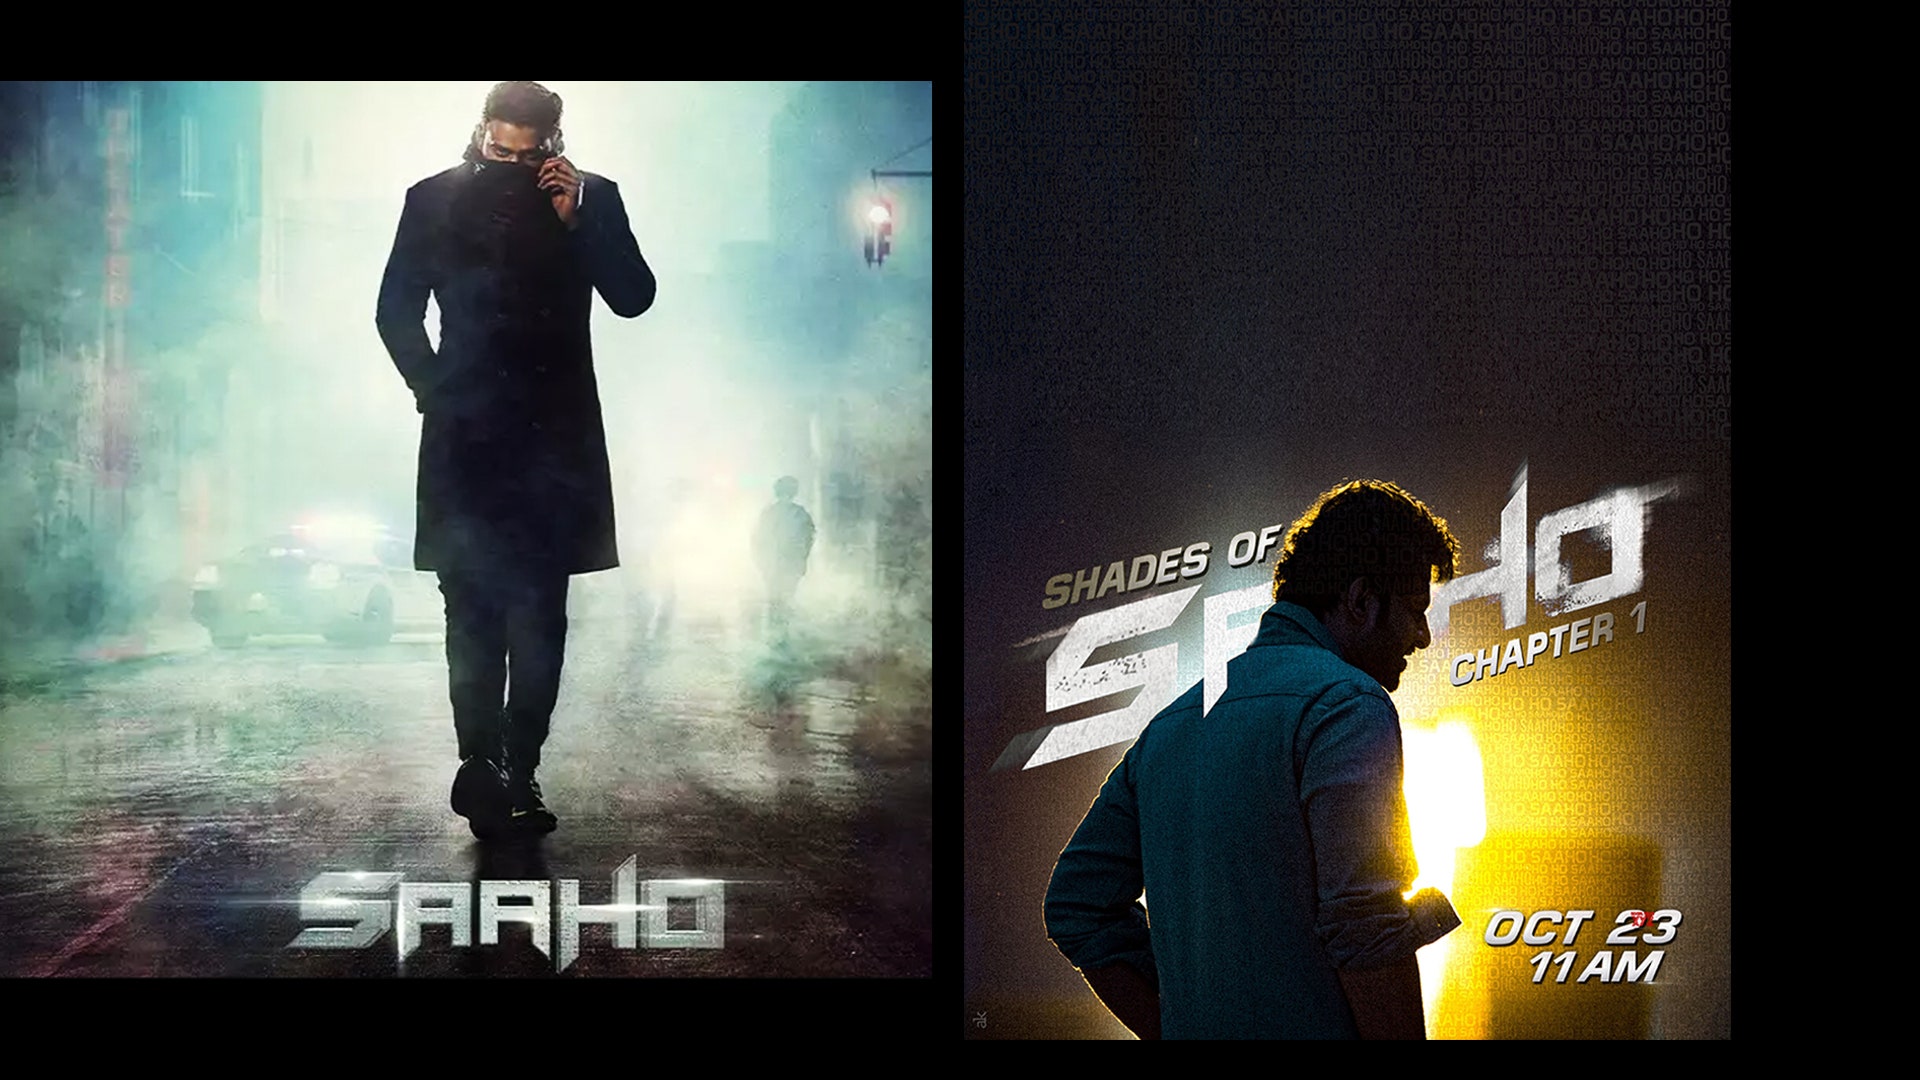 Saaho 2018 Movie Poster Wallpapers